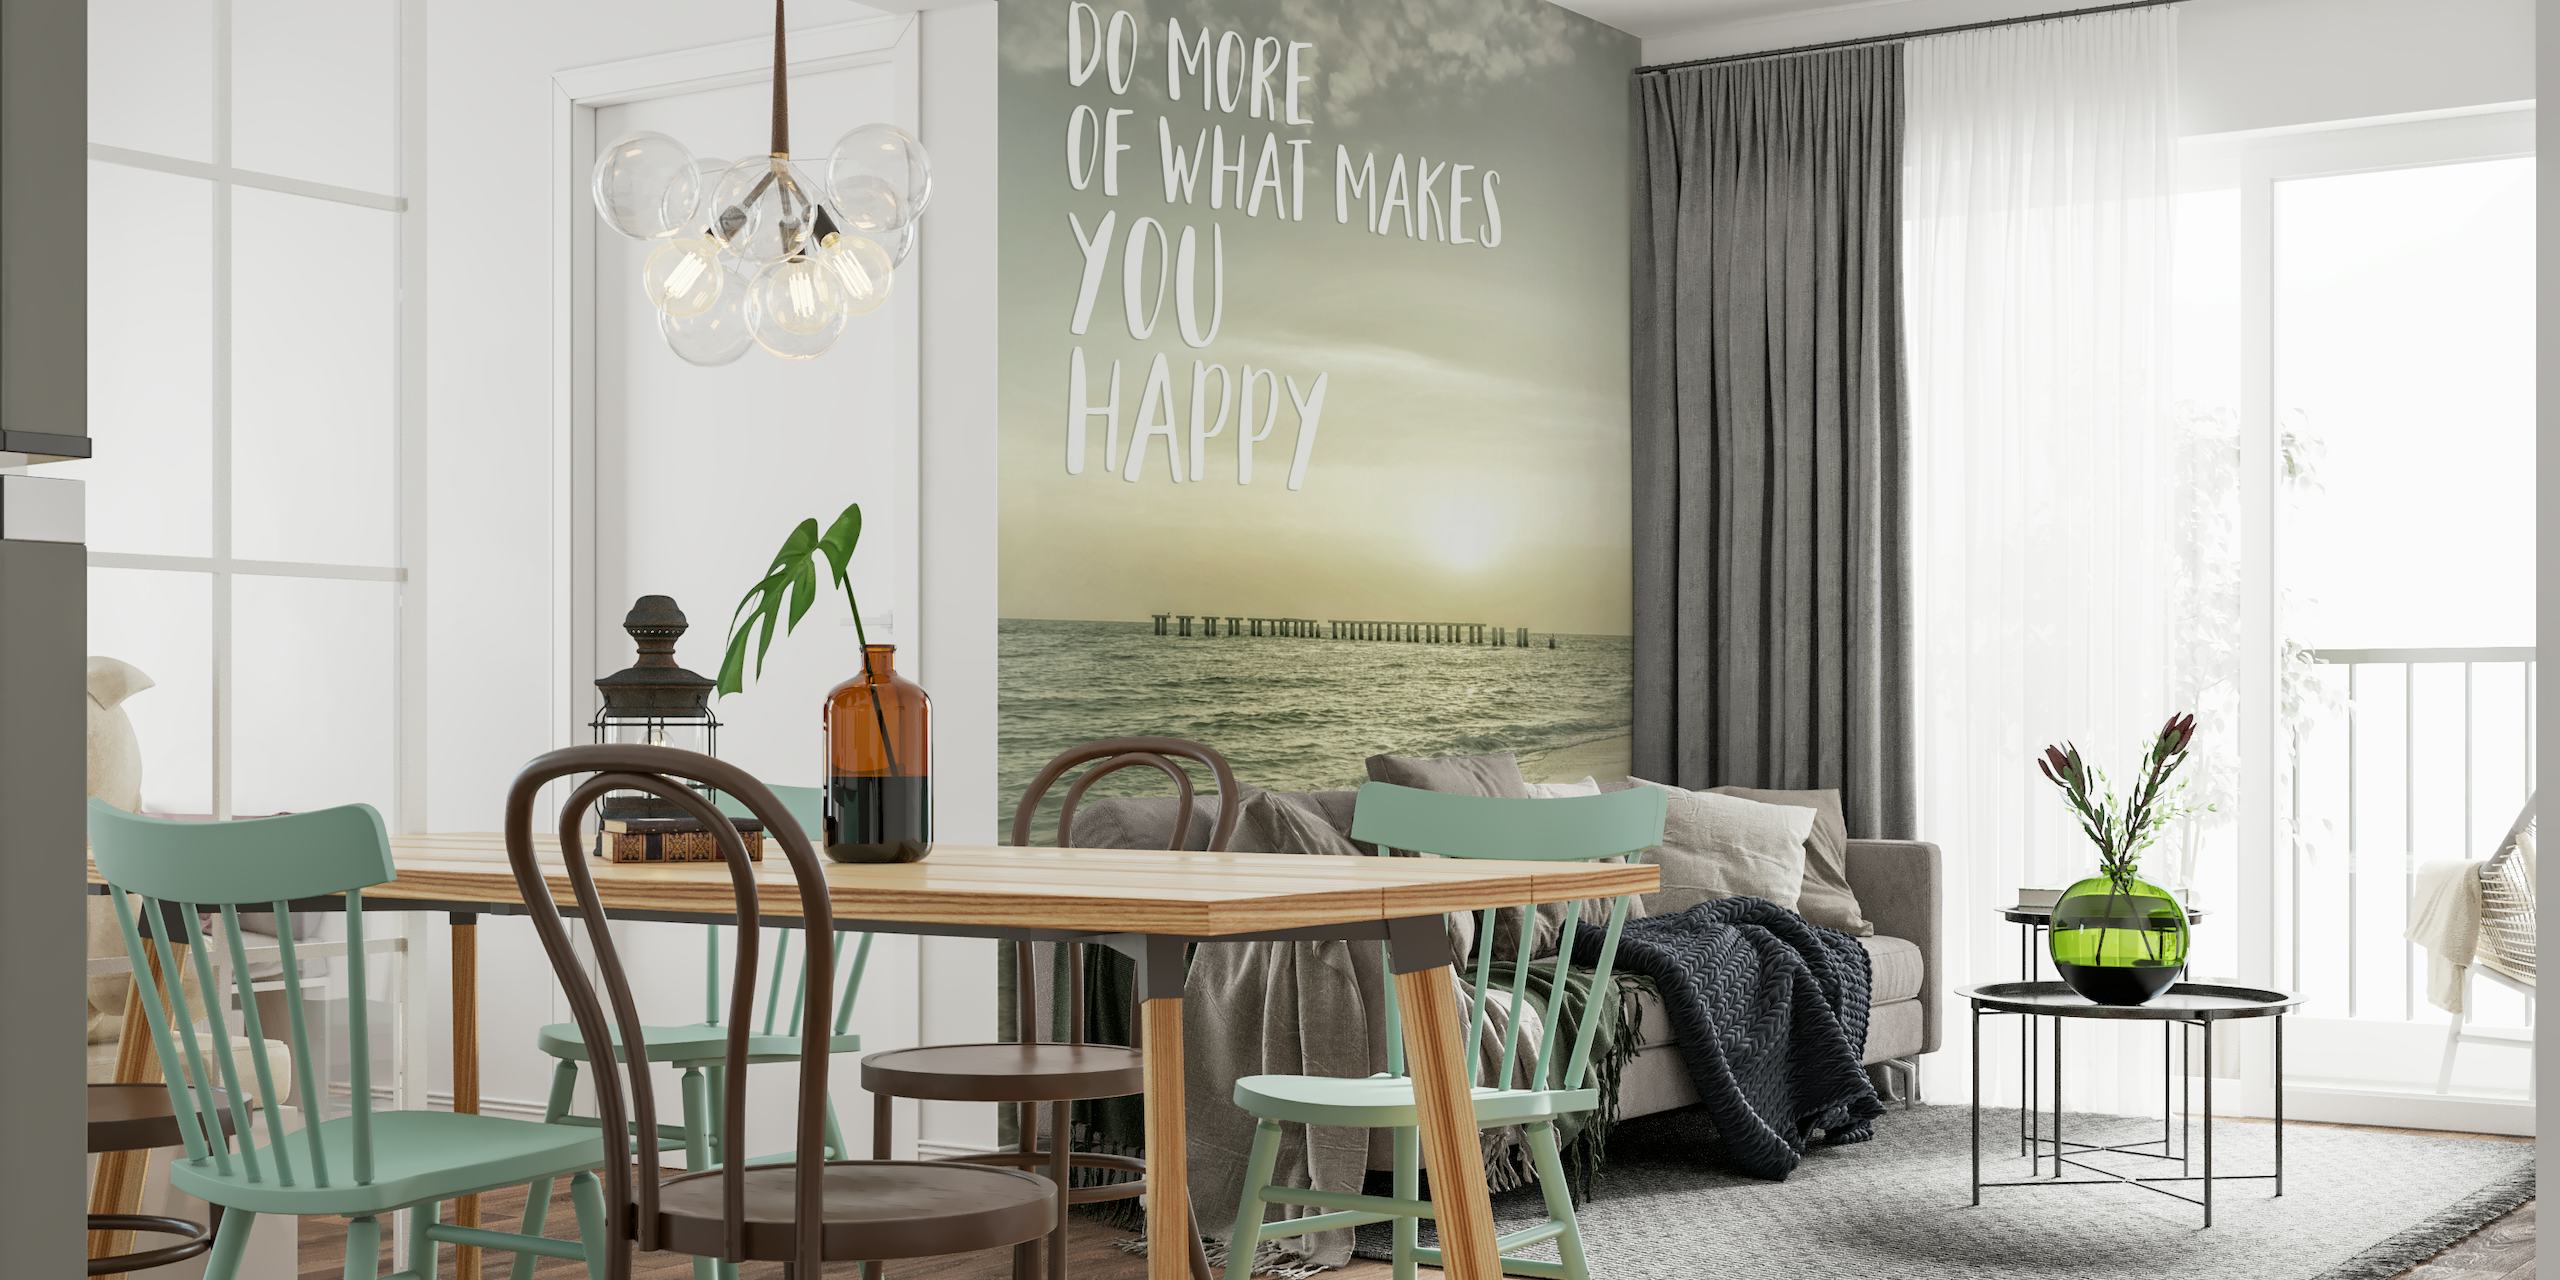 Do more of what makes you happy | Sunset wallpaper